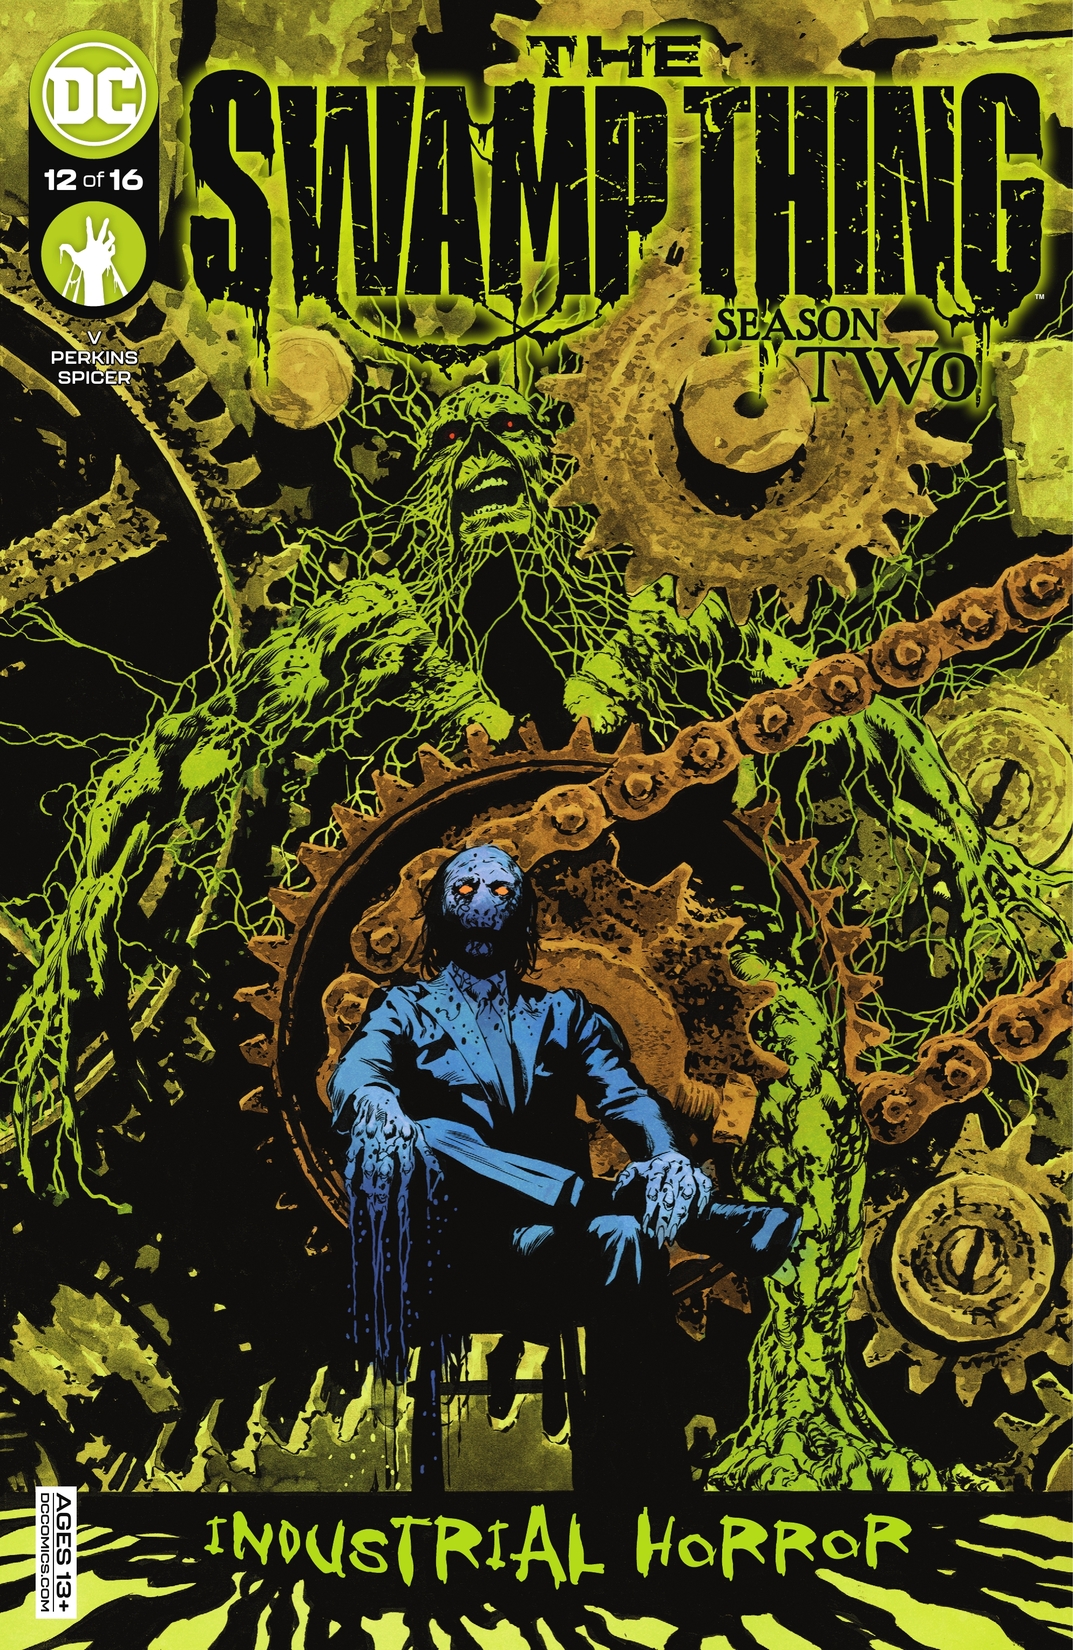 The Swamp Thing #12 preview images